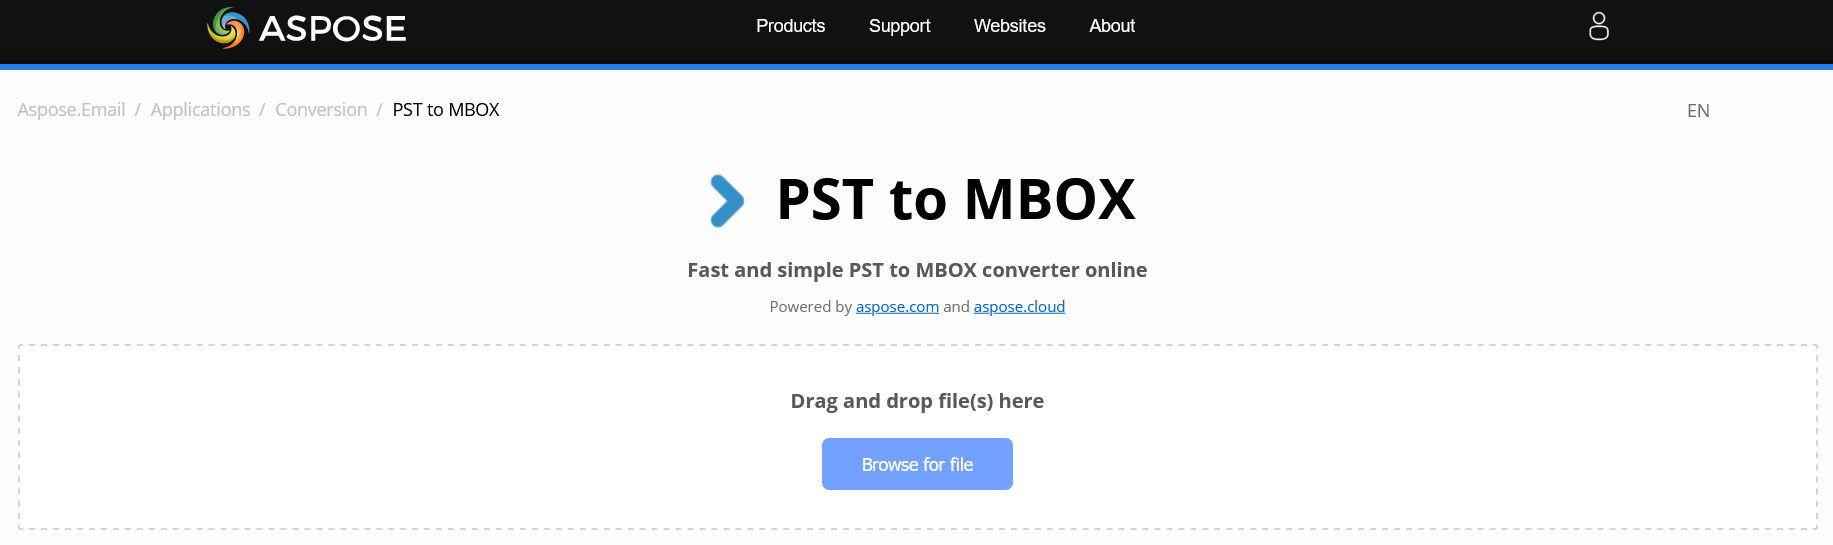 ASPOSE PST to MBOX Online Converter